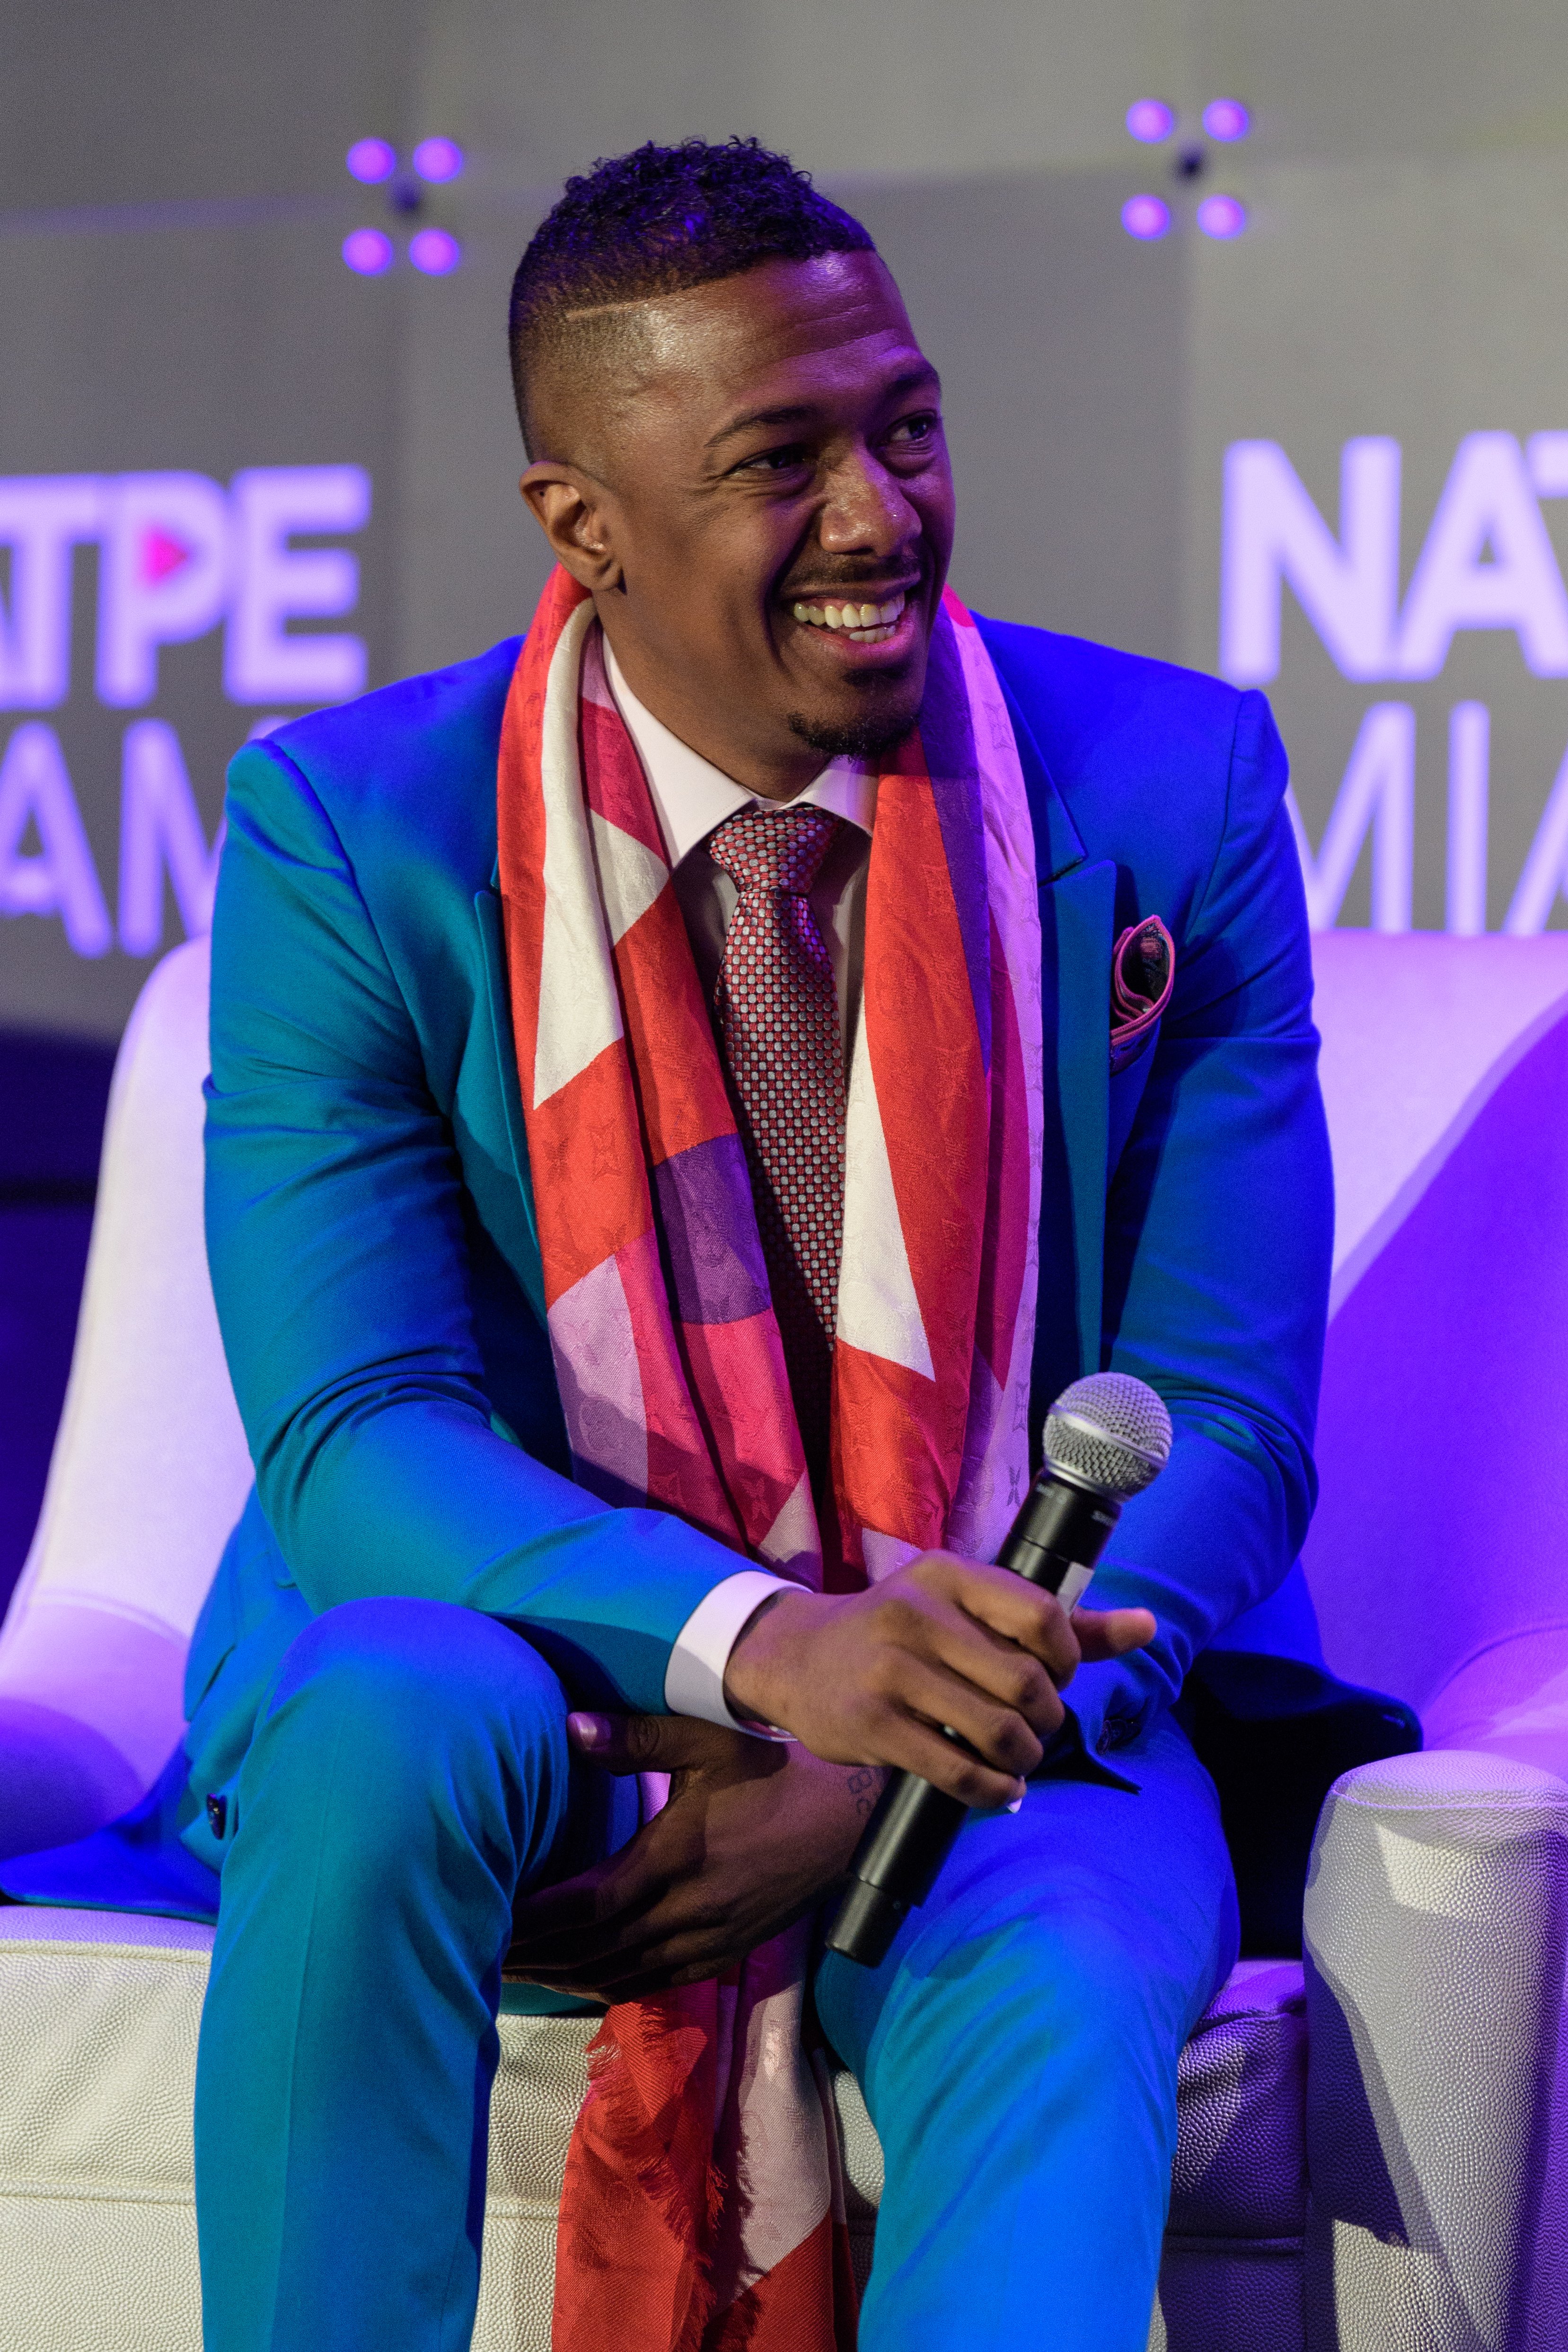 Nick Cannon at the NATPE Miami 2020 - Iris Awards at Fontainebleau Hotel on January 22, 2020 in Miami Beach, Florida. | Source: Getty Images